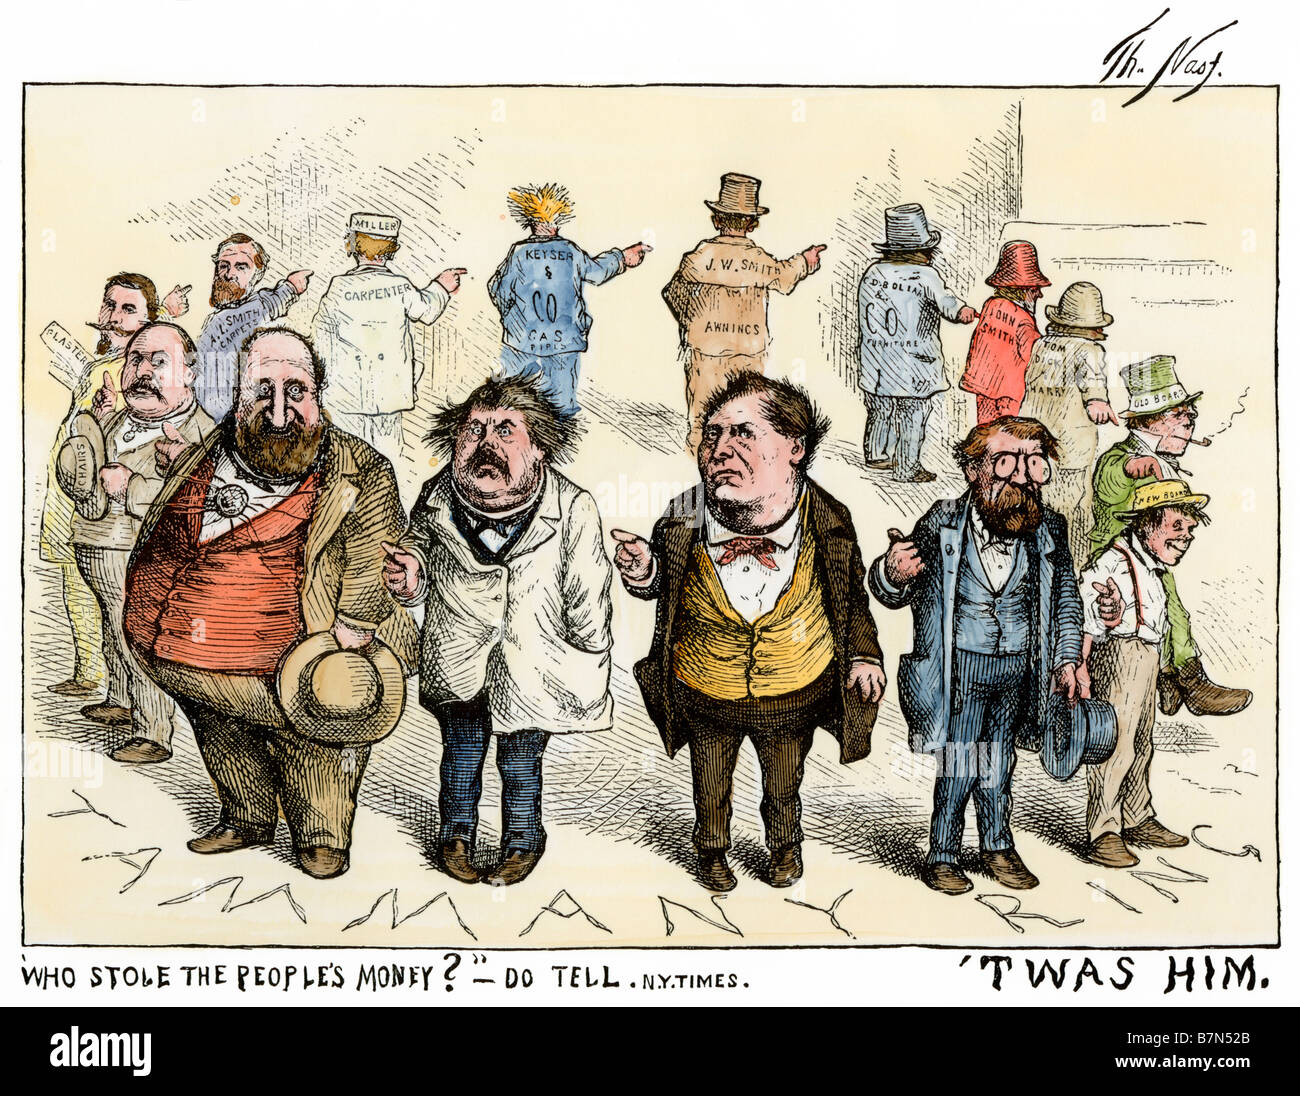 'Who stole the people's money?  'Twas him.' Thomas Nast cartoon about Tammany Hall corruption, 1871.  Hand-colored woodcut Stock Photo